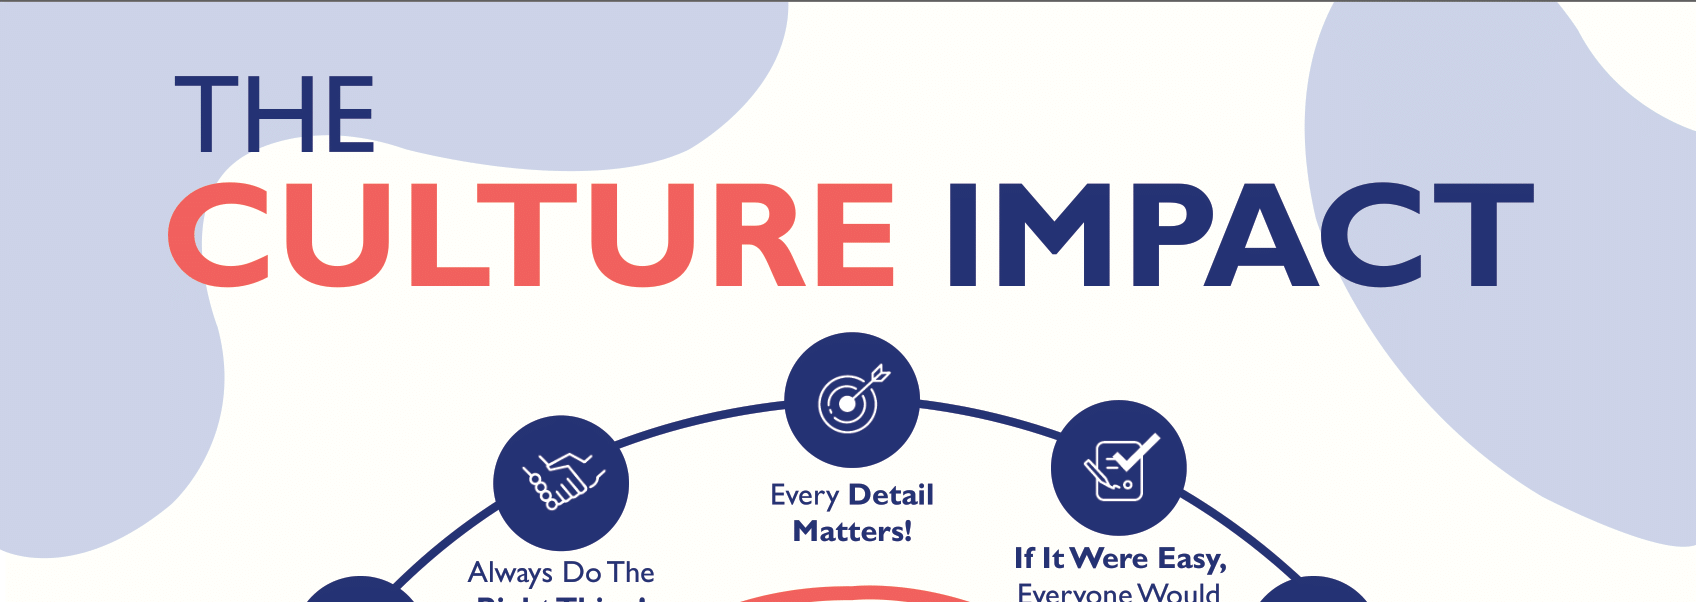 Thumbnail for culture impact infographic